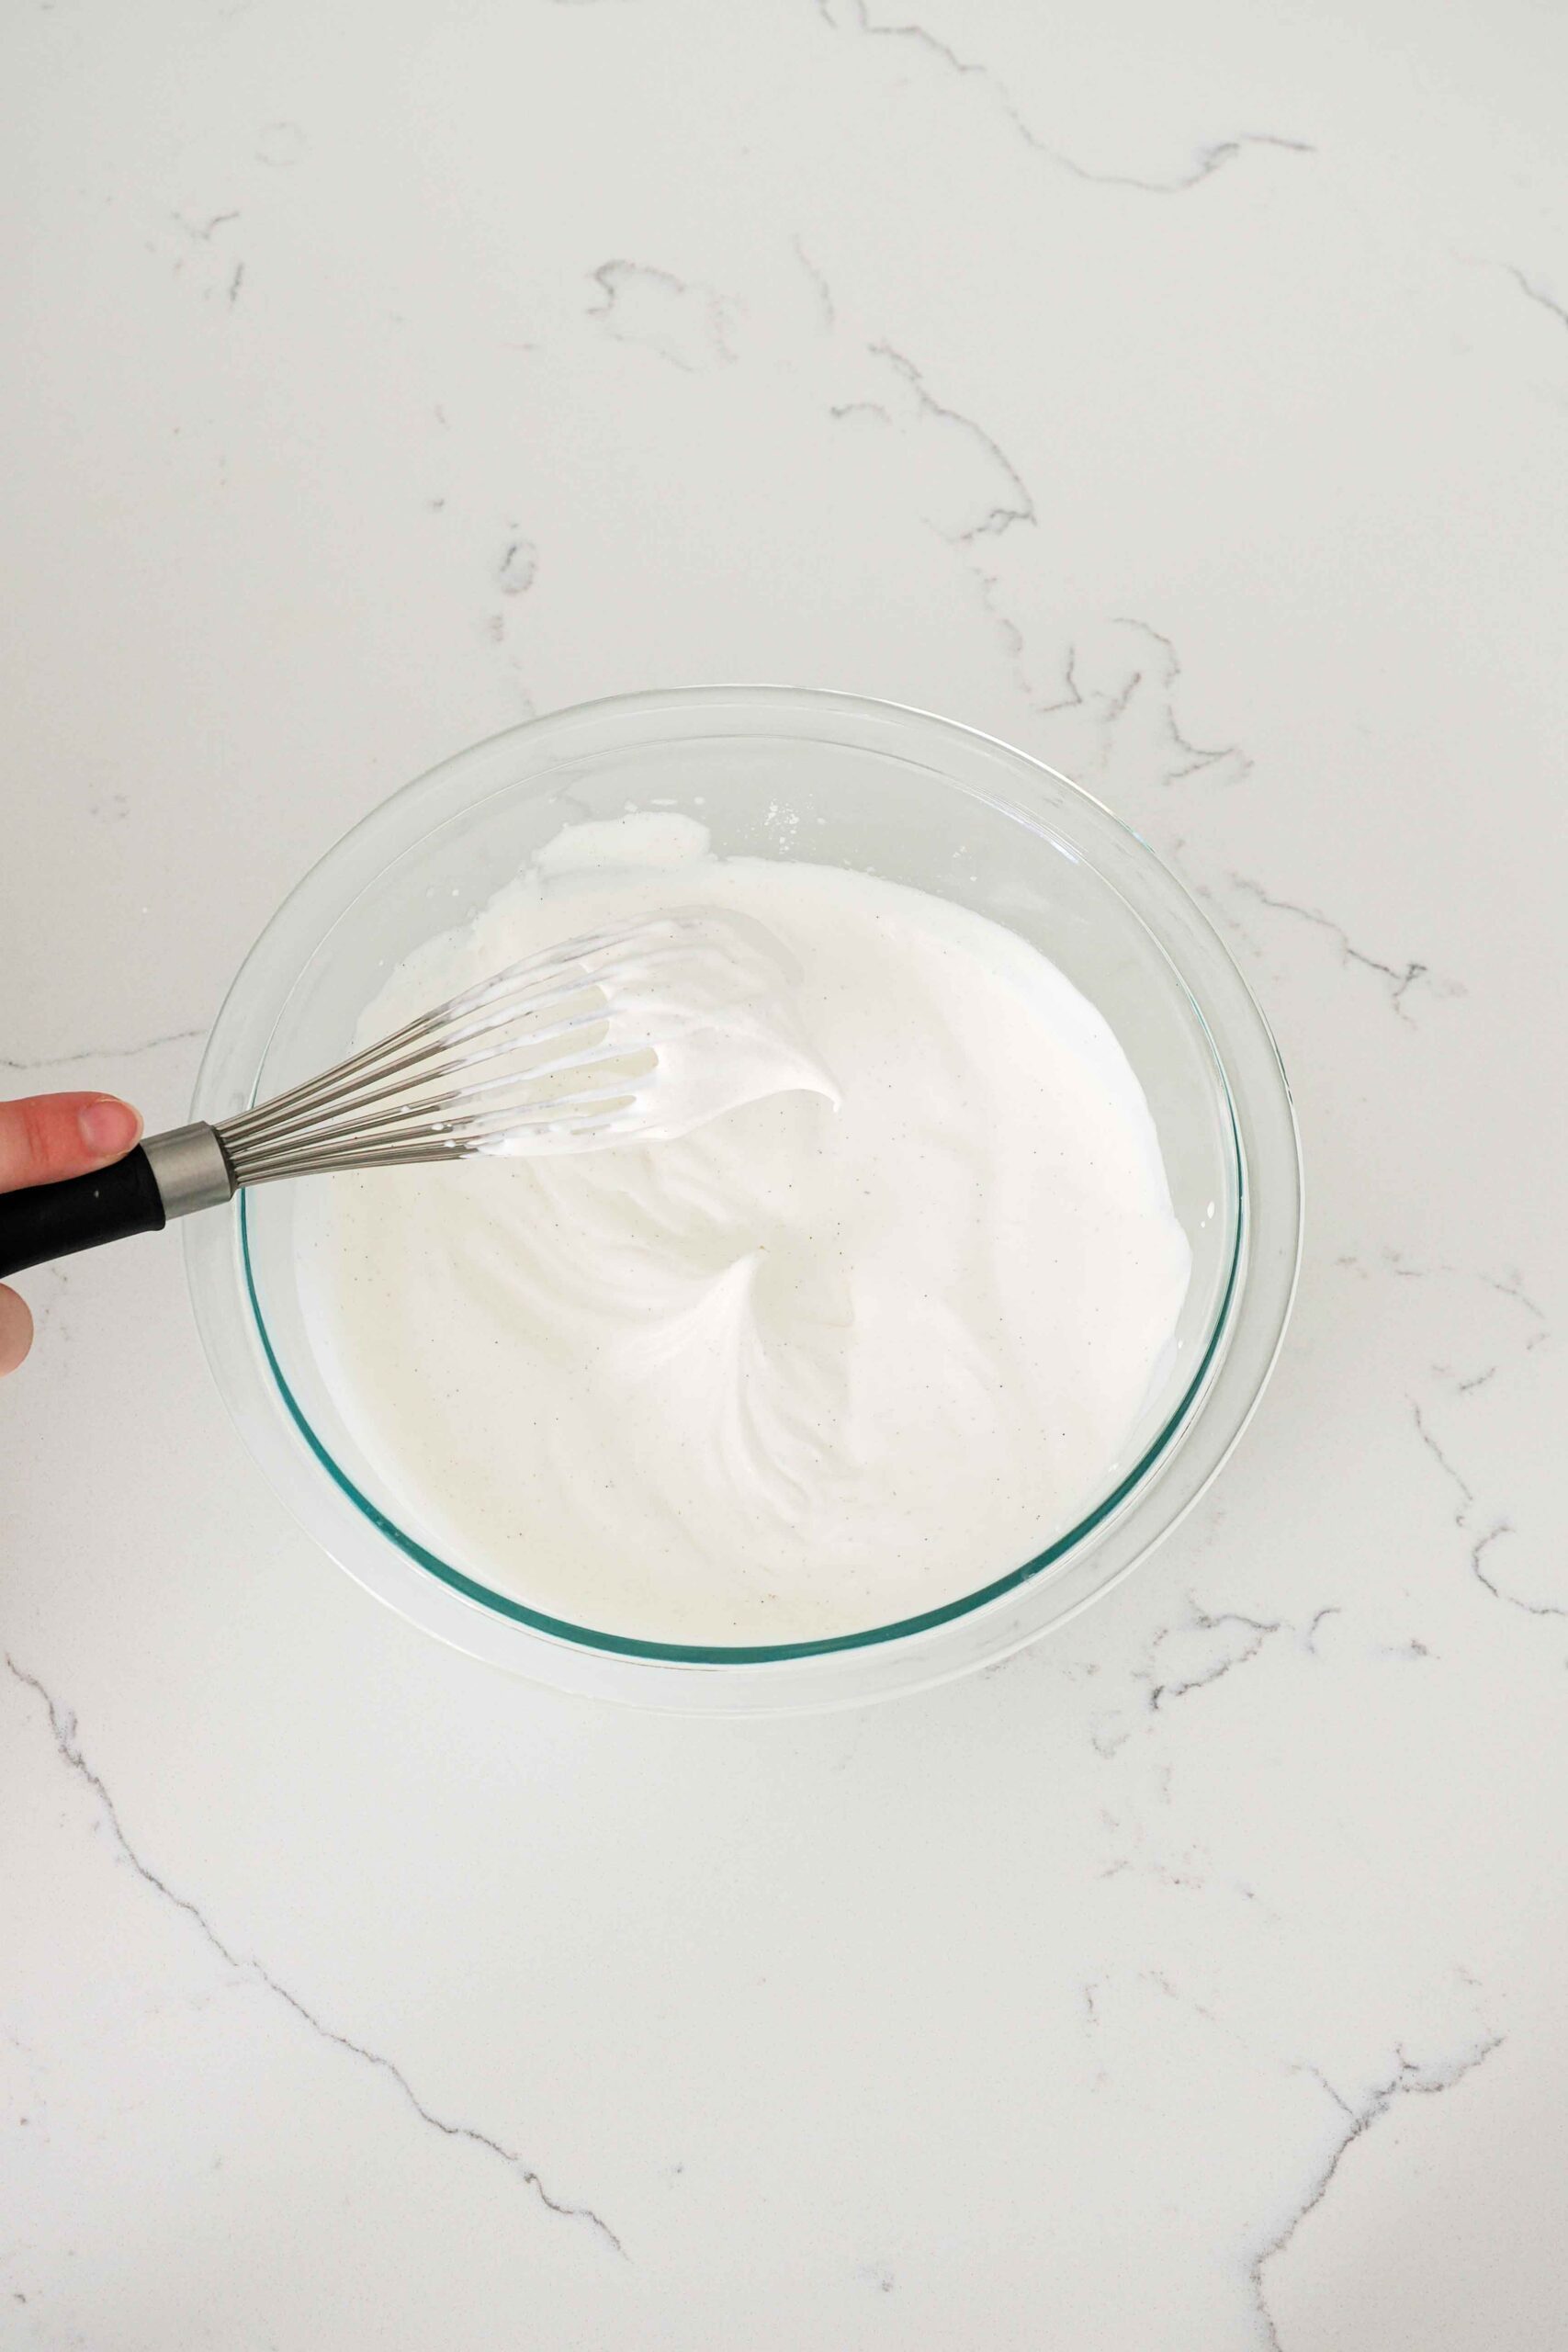 A whisk with a clump of whipped cream drooping off of it in soft peaks.